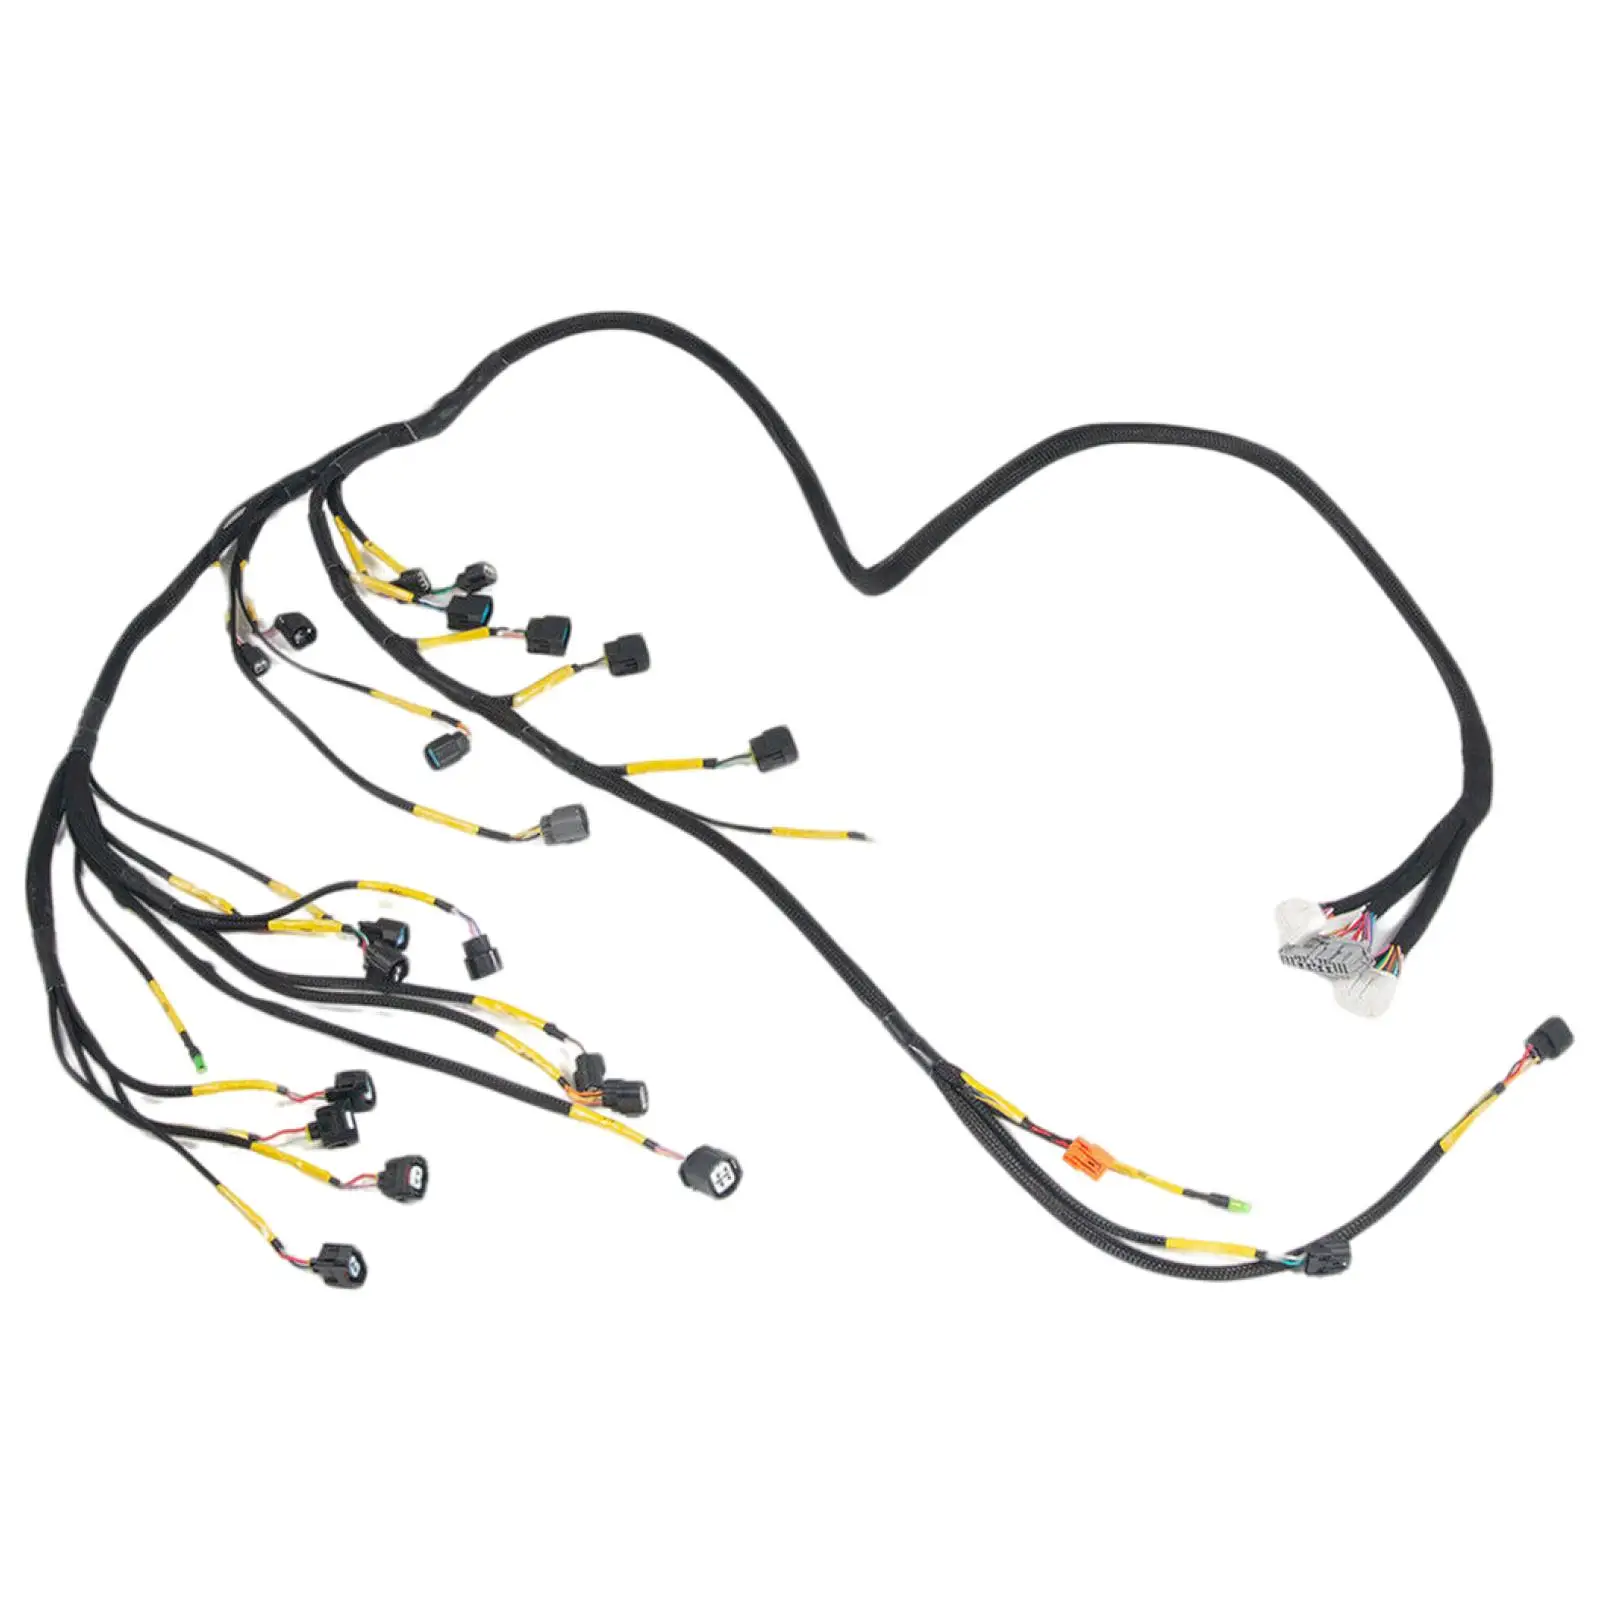 K20 K24 K Series Tucked Engine Harness Fit for K Swap Auto Wiring Harness Assembly Durable